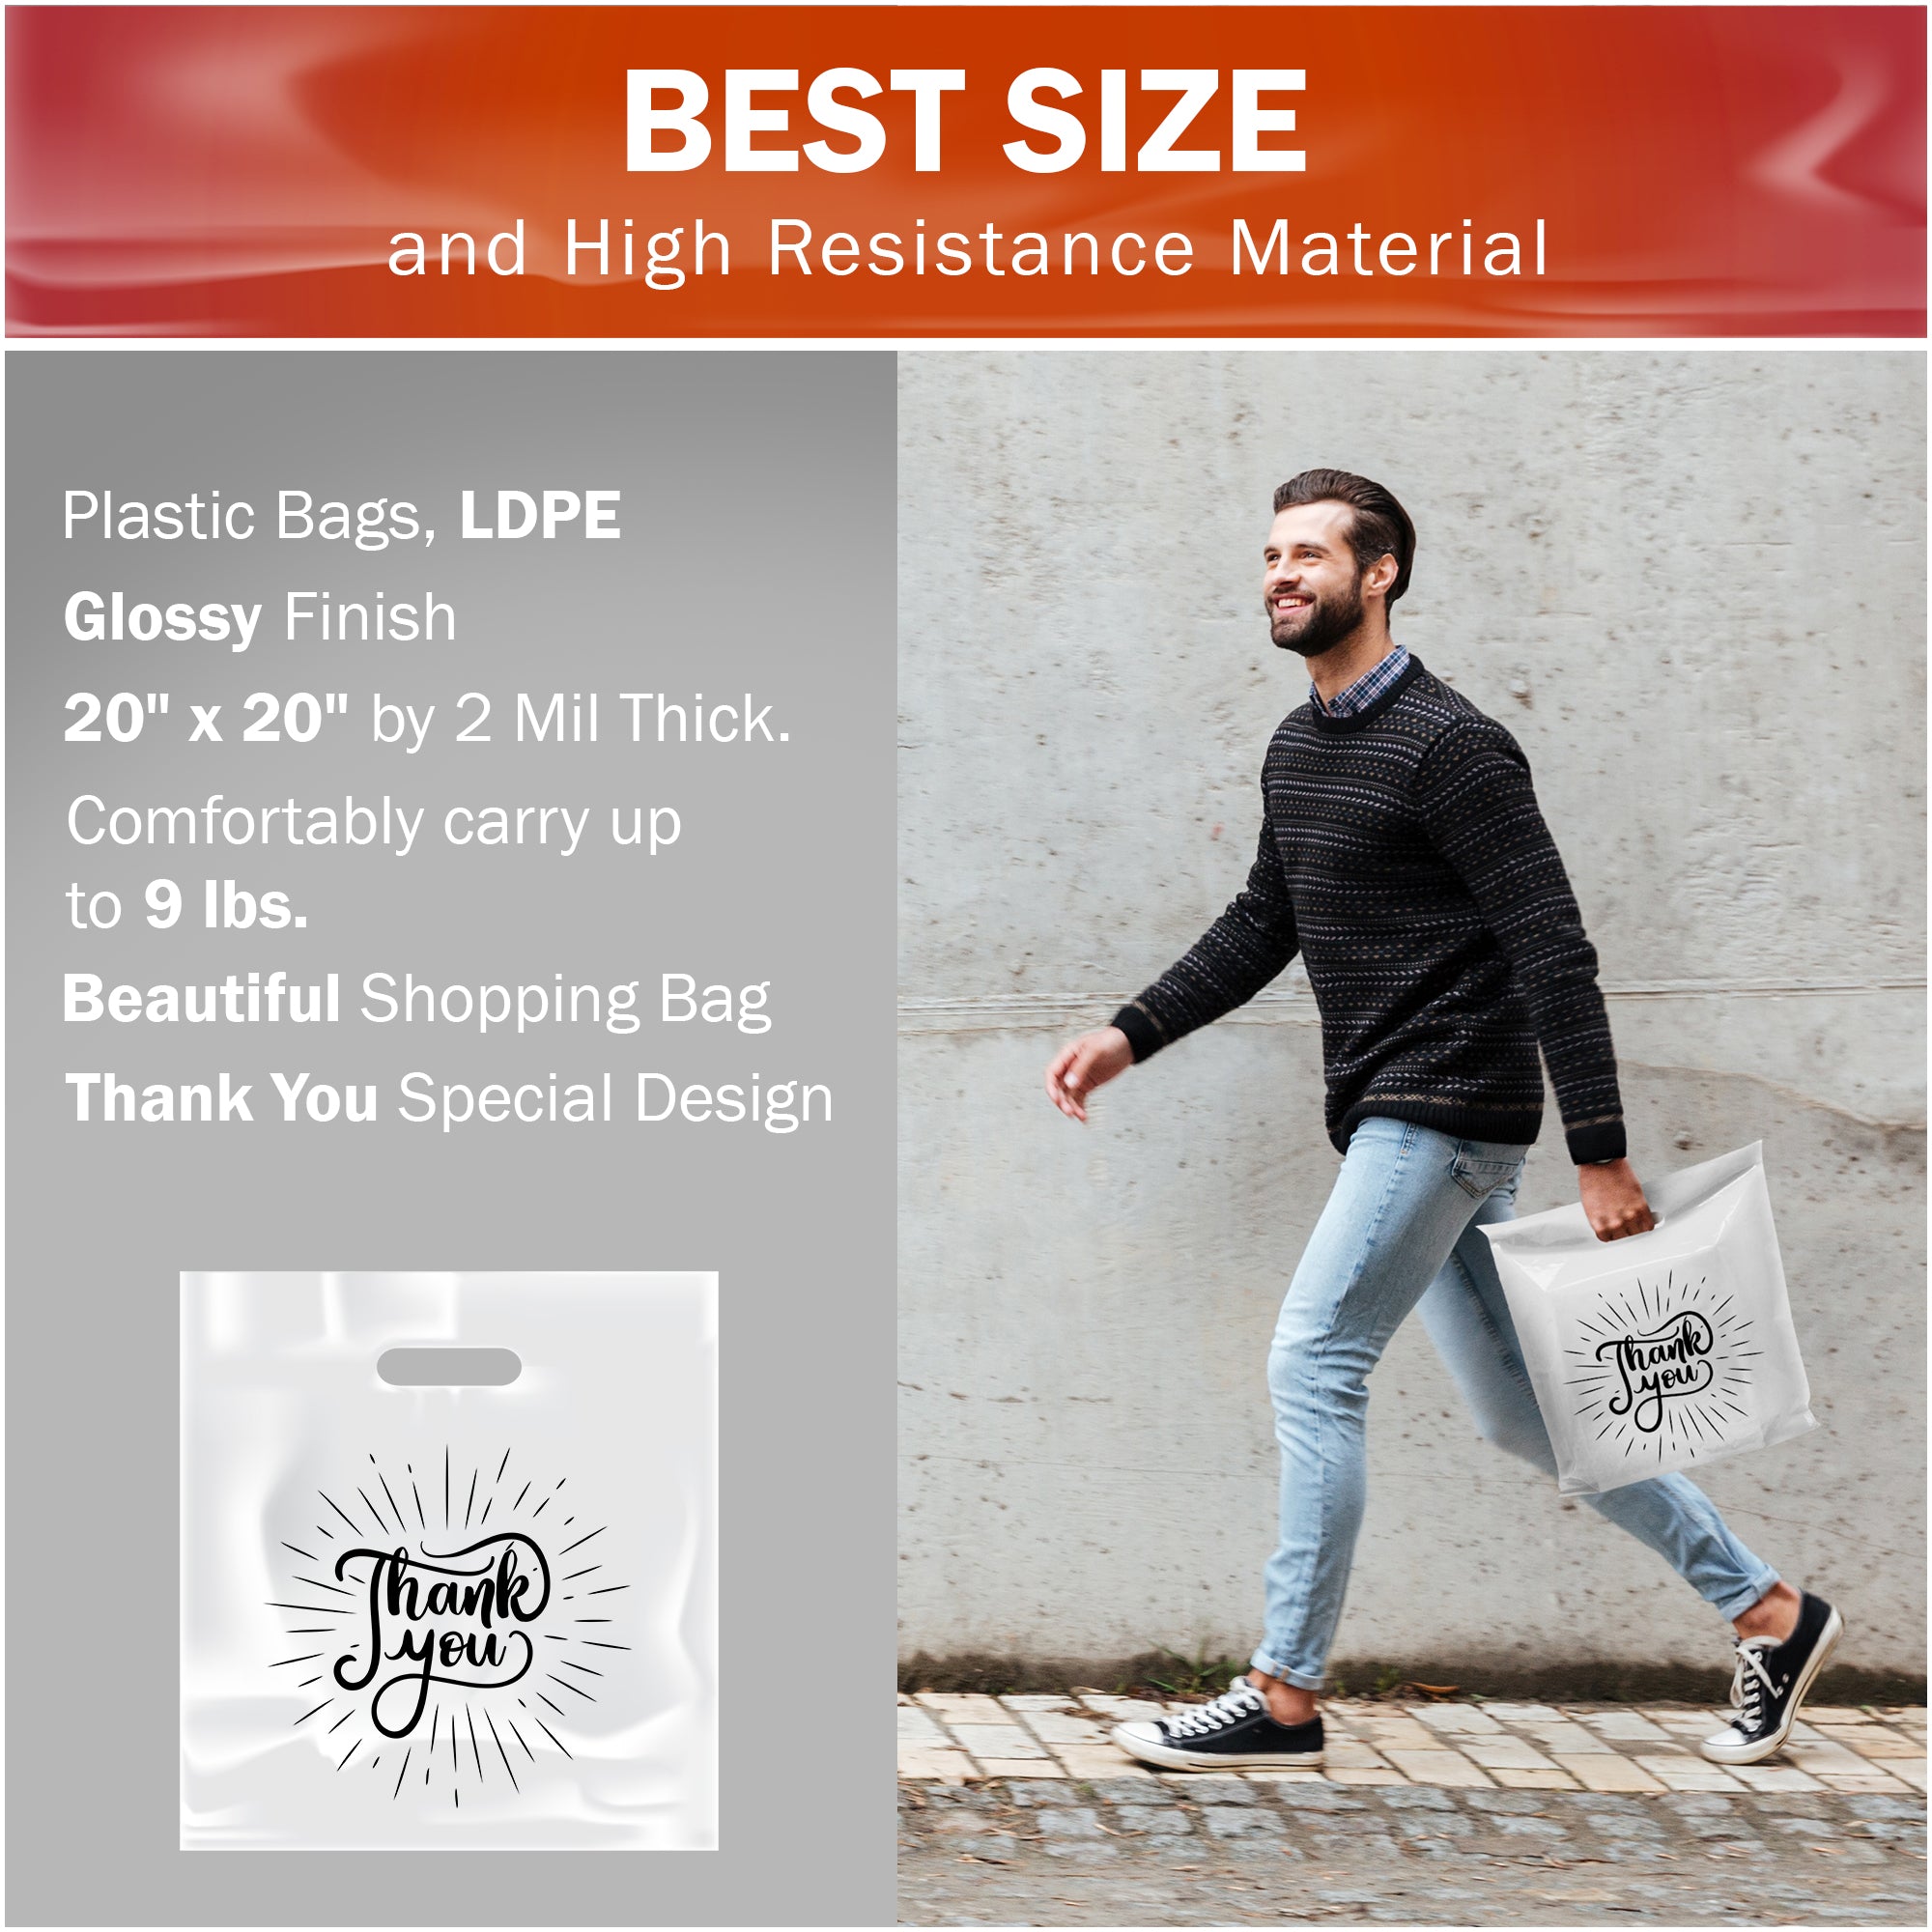 Popular Plastic Bags White Merchandise Plastic Shopping Bags - 100 Pack 9' x 12' with 1.5 Mil Thick | Die Cut Handles | Perfect for Retail, Party Favo